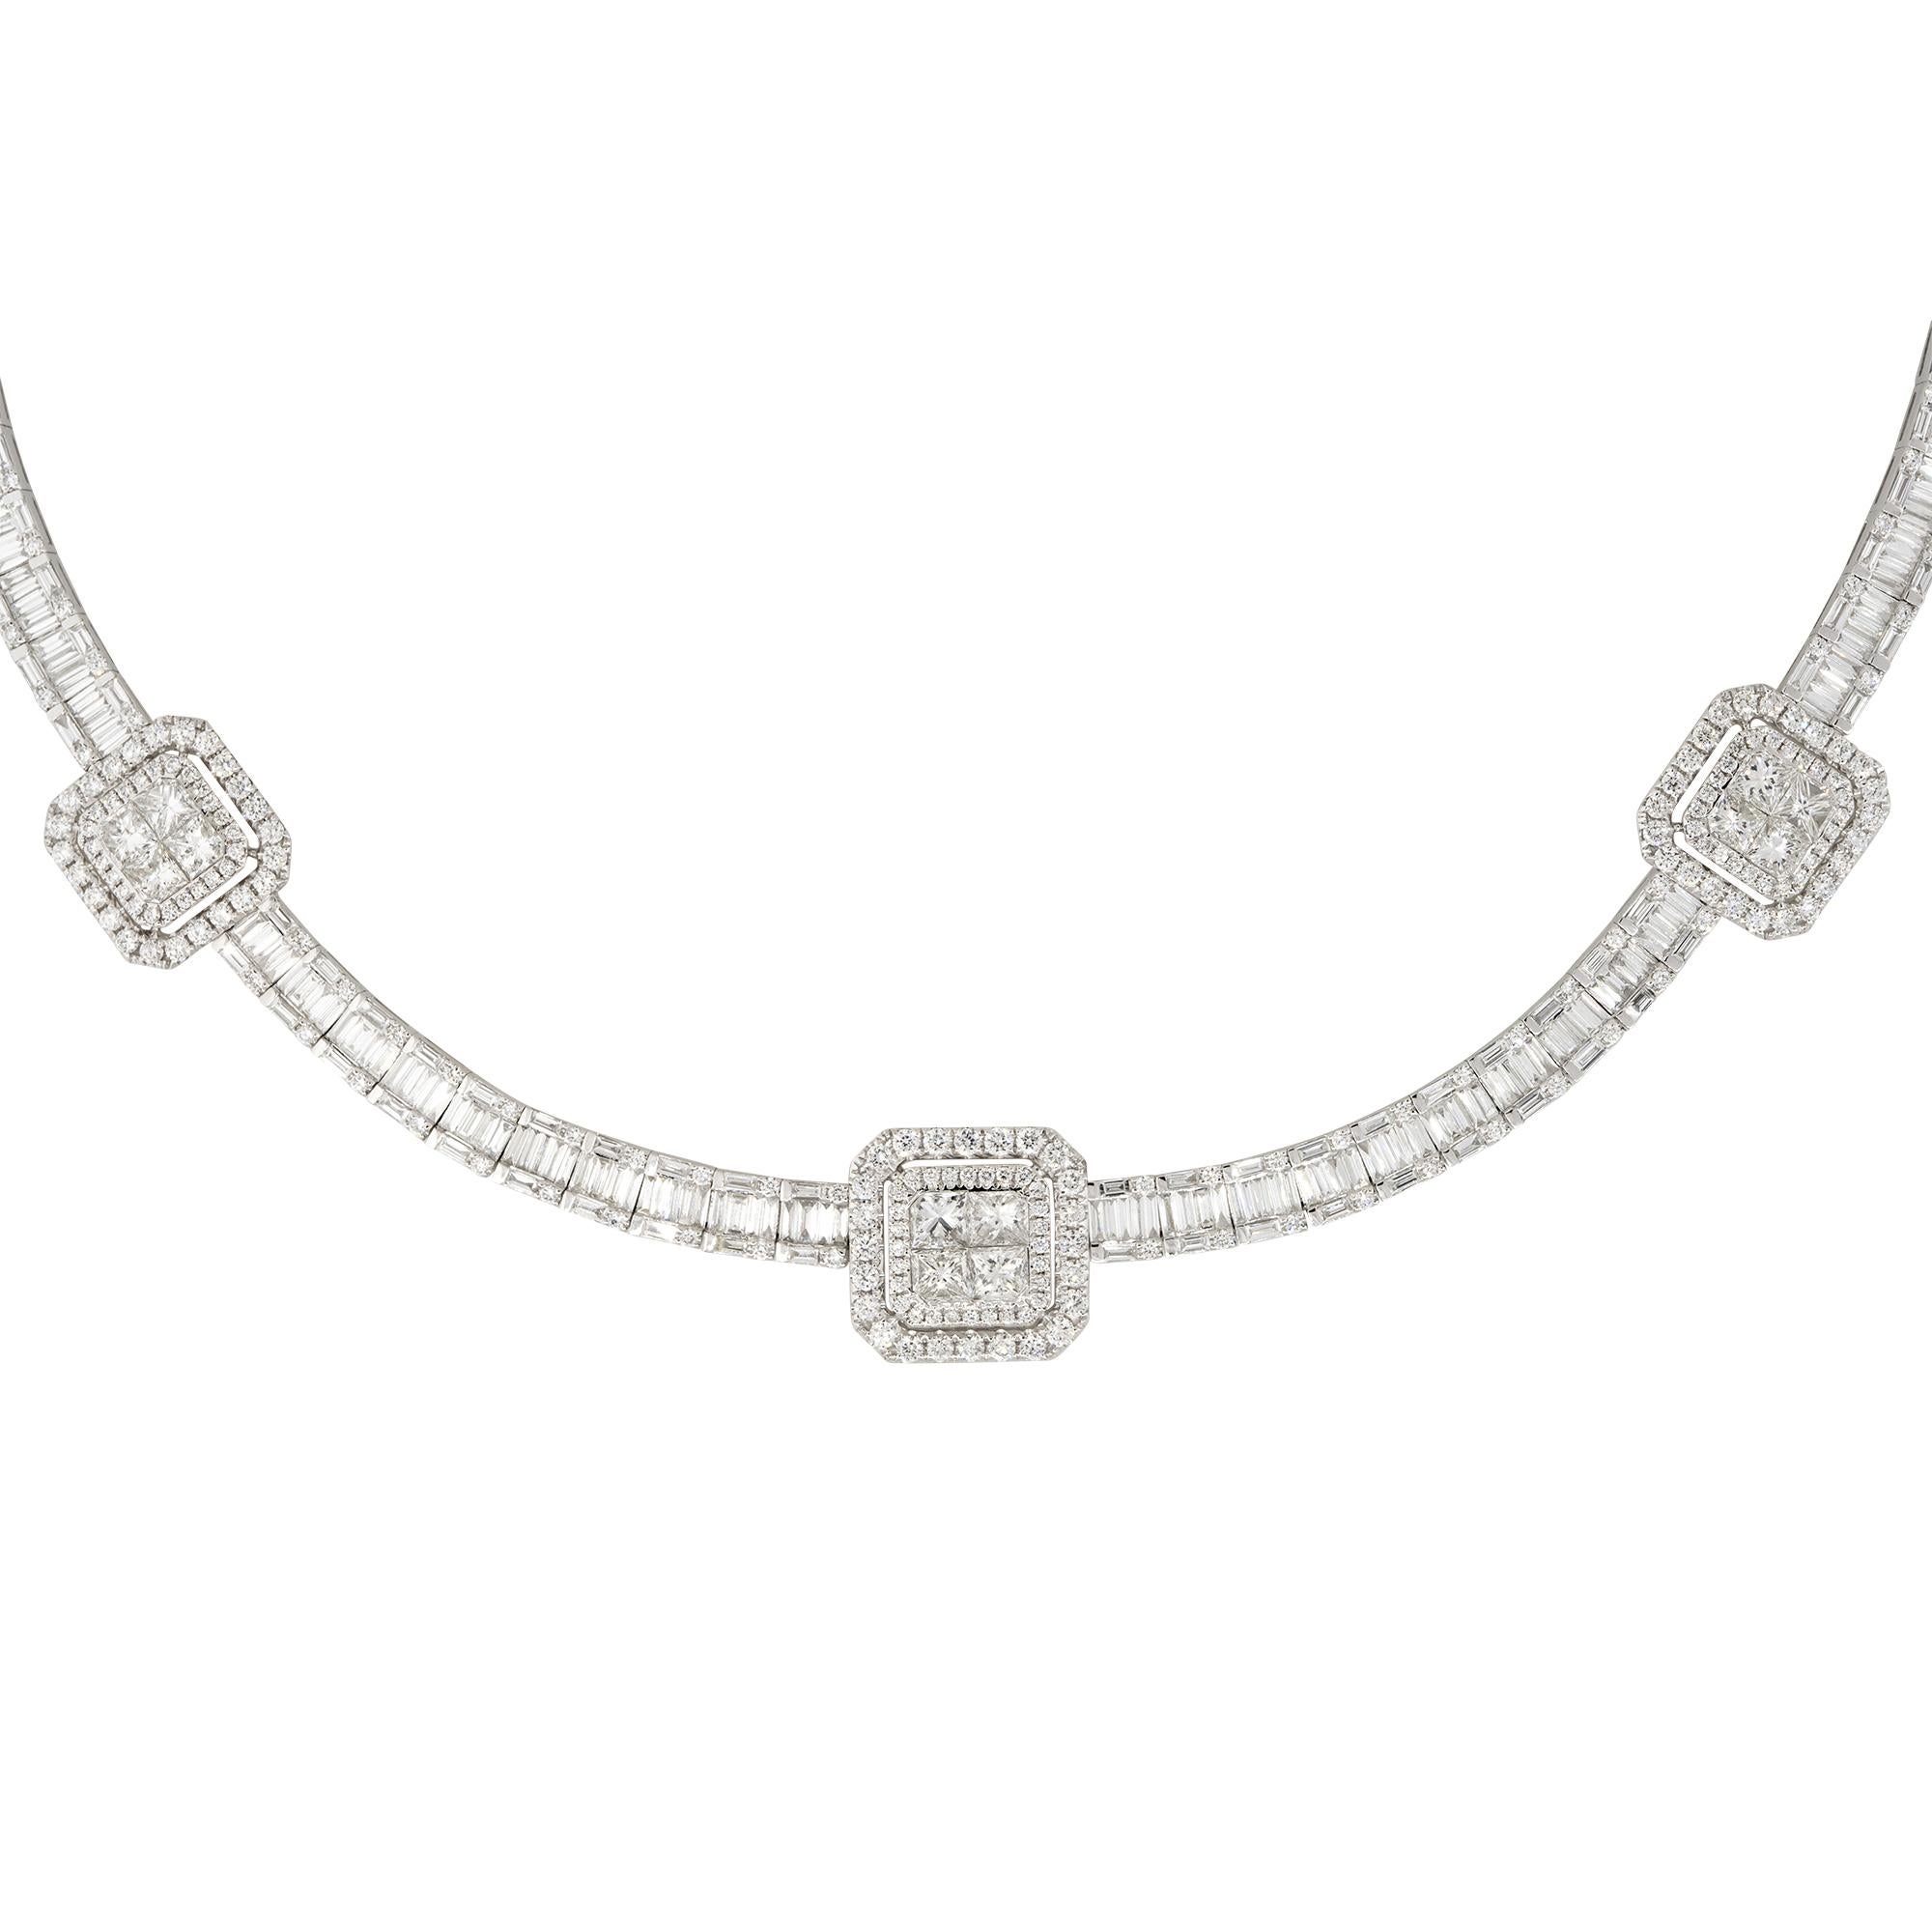 This 18k white gold 21.71ctw baguette, round brilliant, and princess cut diamond station necklace is a luxurious and stunning piece of jewelry. This necklace is made of 18k white gold, which is a type of gold that is mixed with other metal alloys to